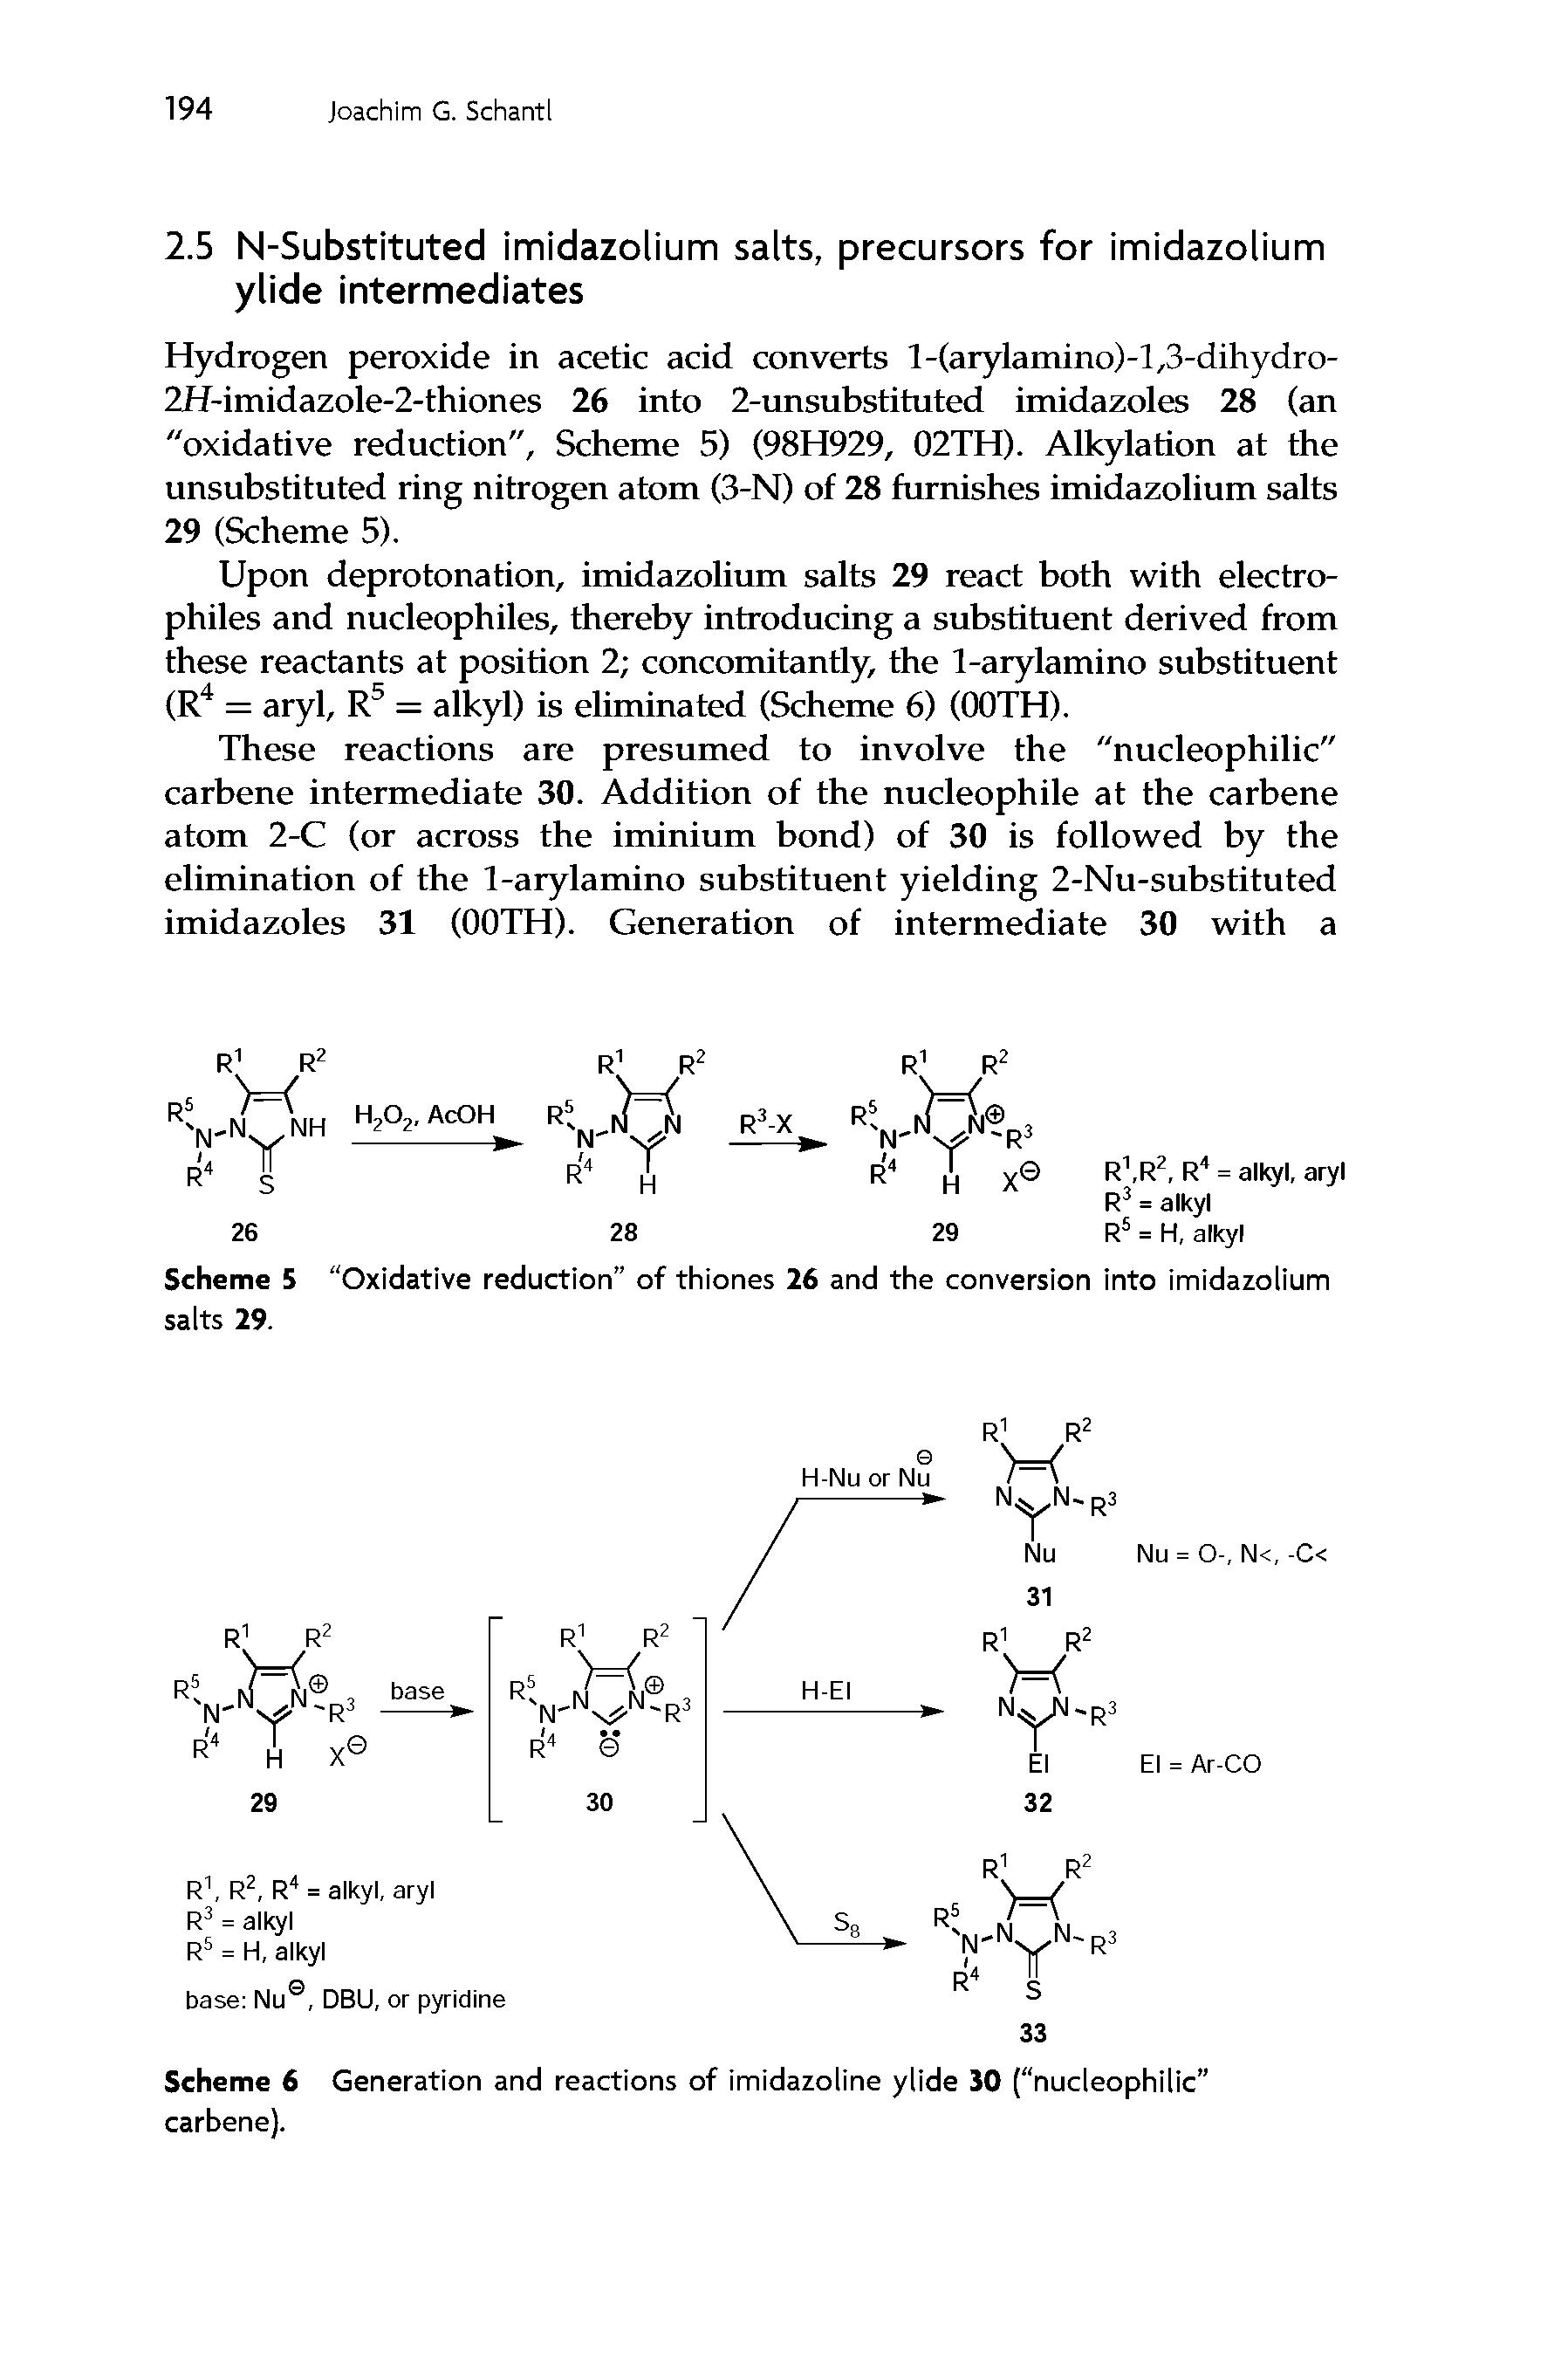 Scheme 6 Generation and reactions of imidazoline ylide 30 ( nucleophilic carbene).